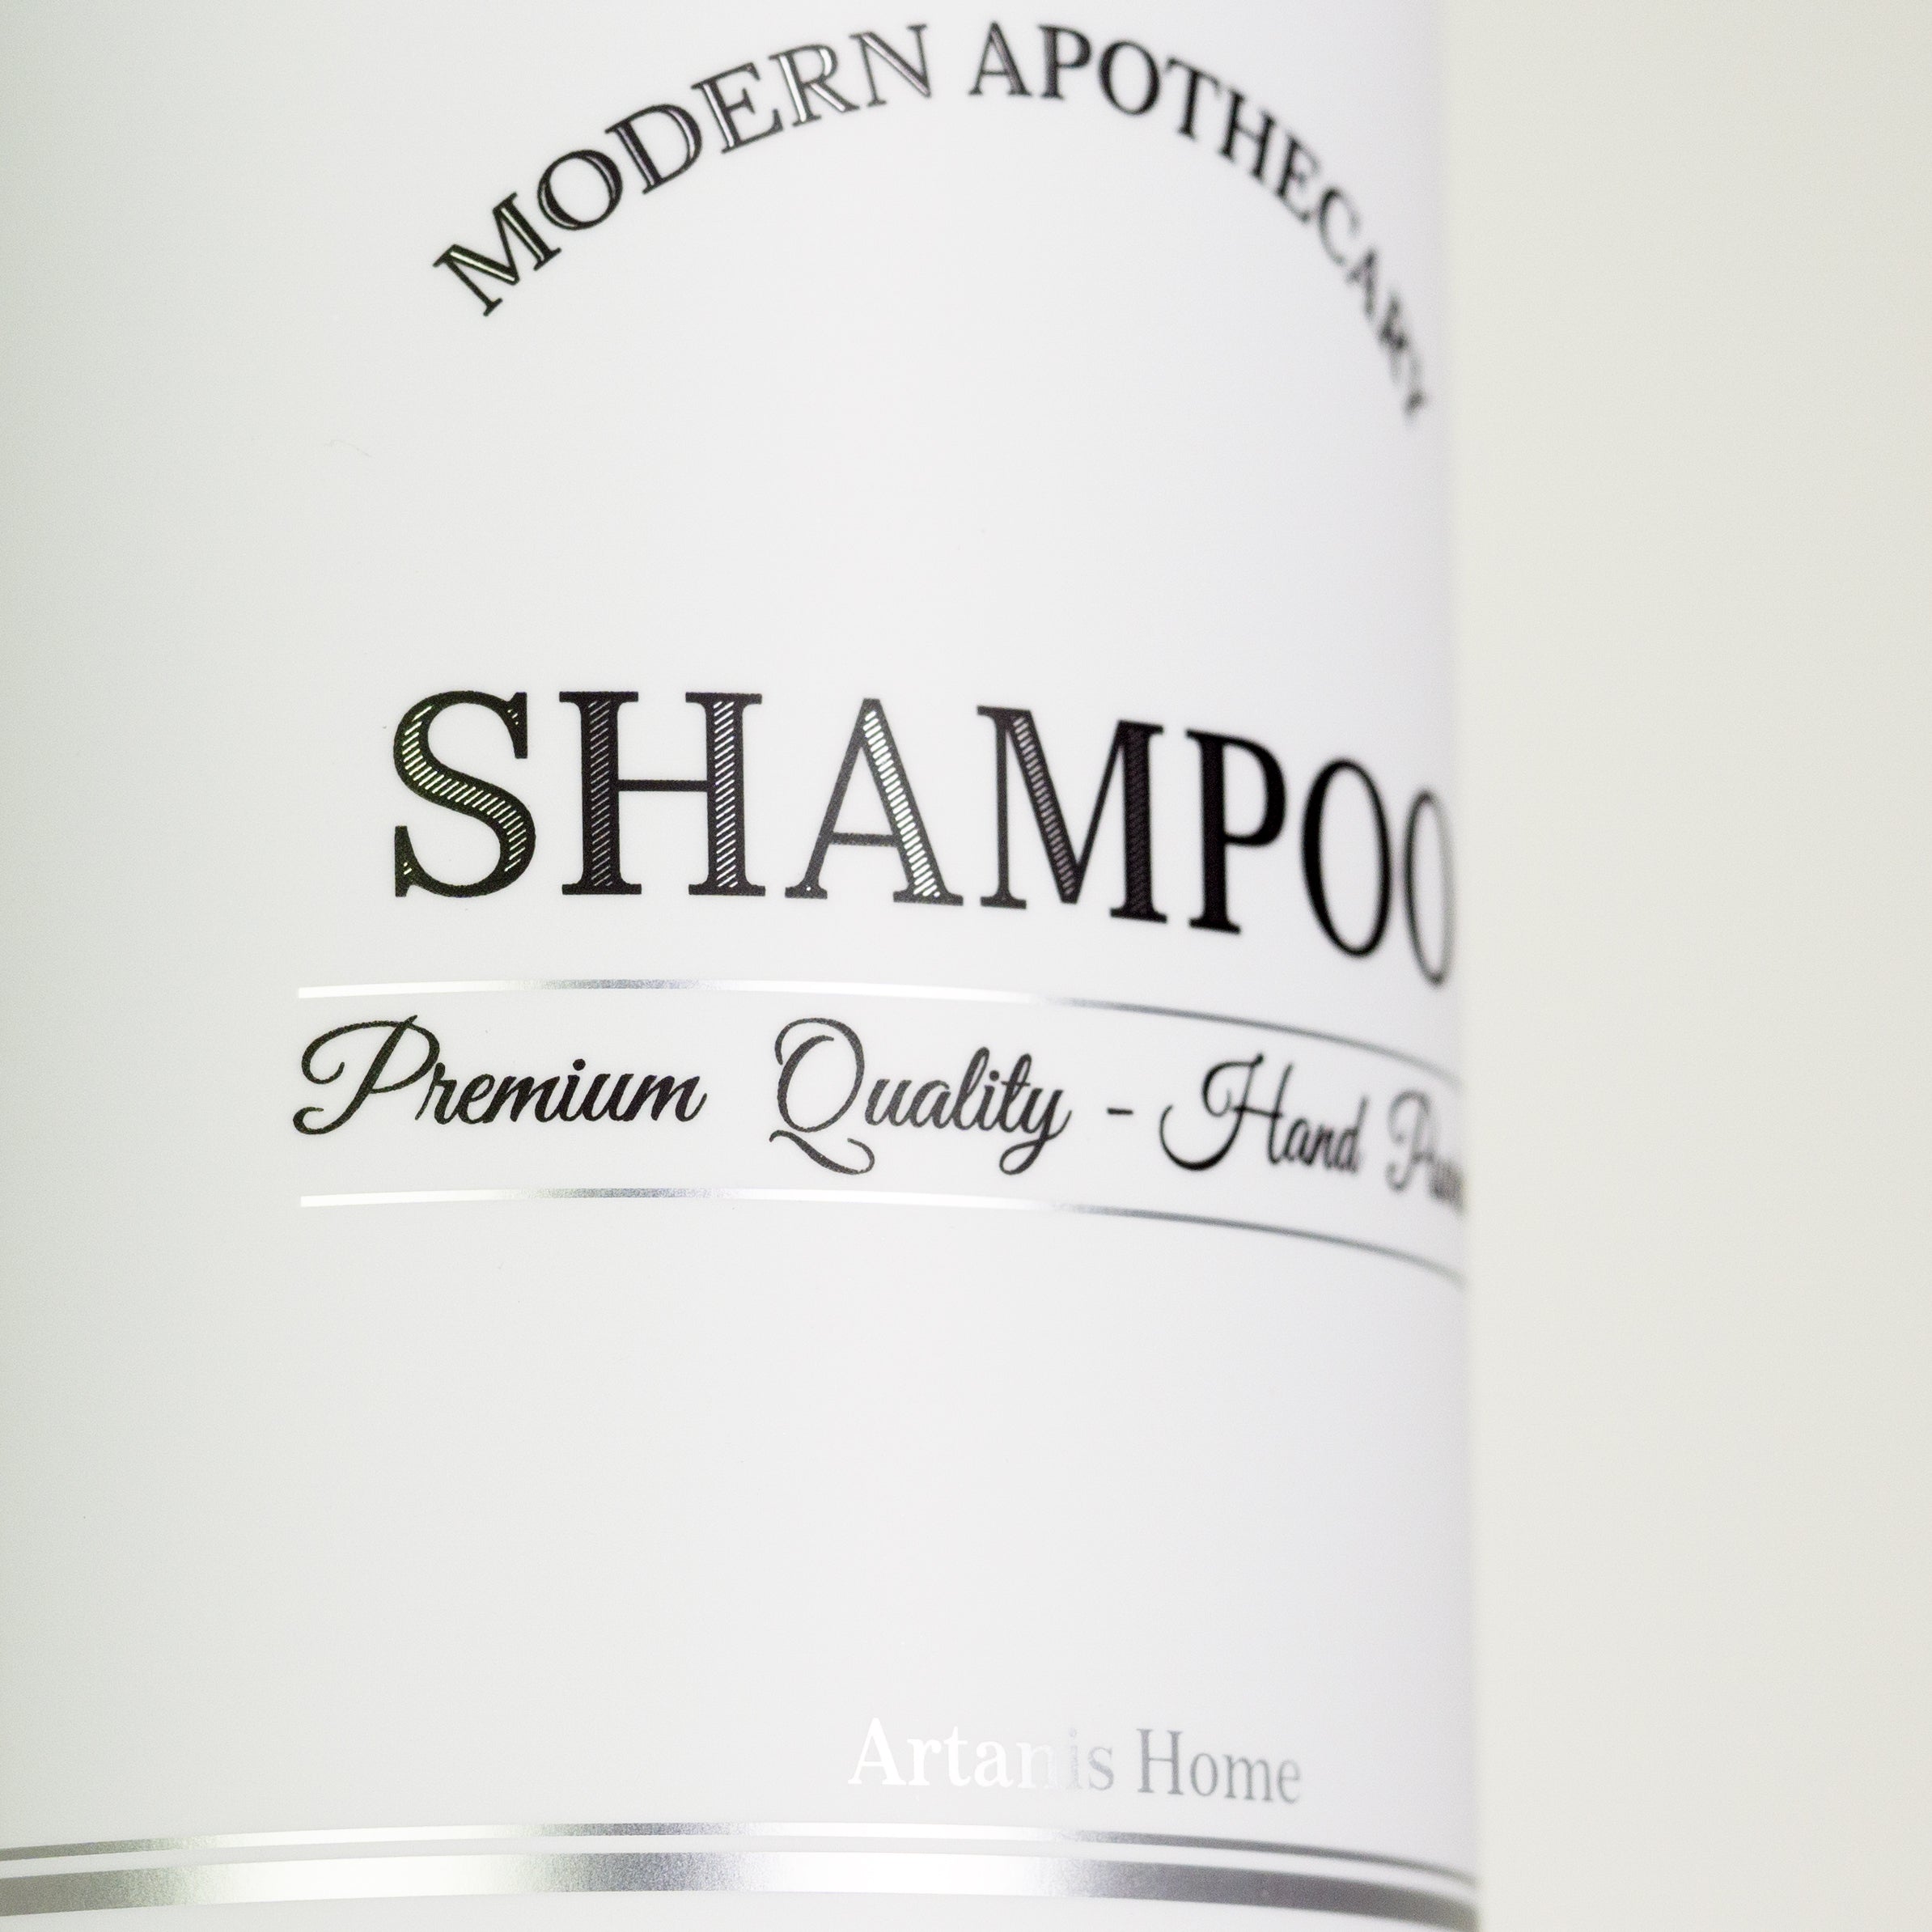 Close-up of the Artanis Home Modern Apothecary label design with silver accents,  refillable shampoo bottle